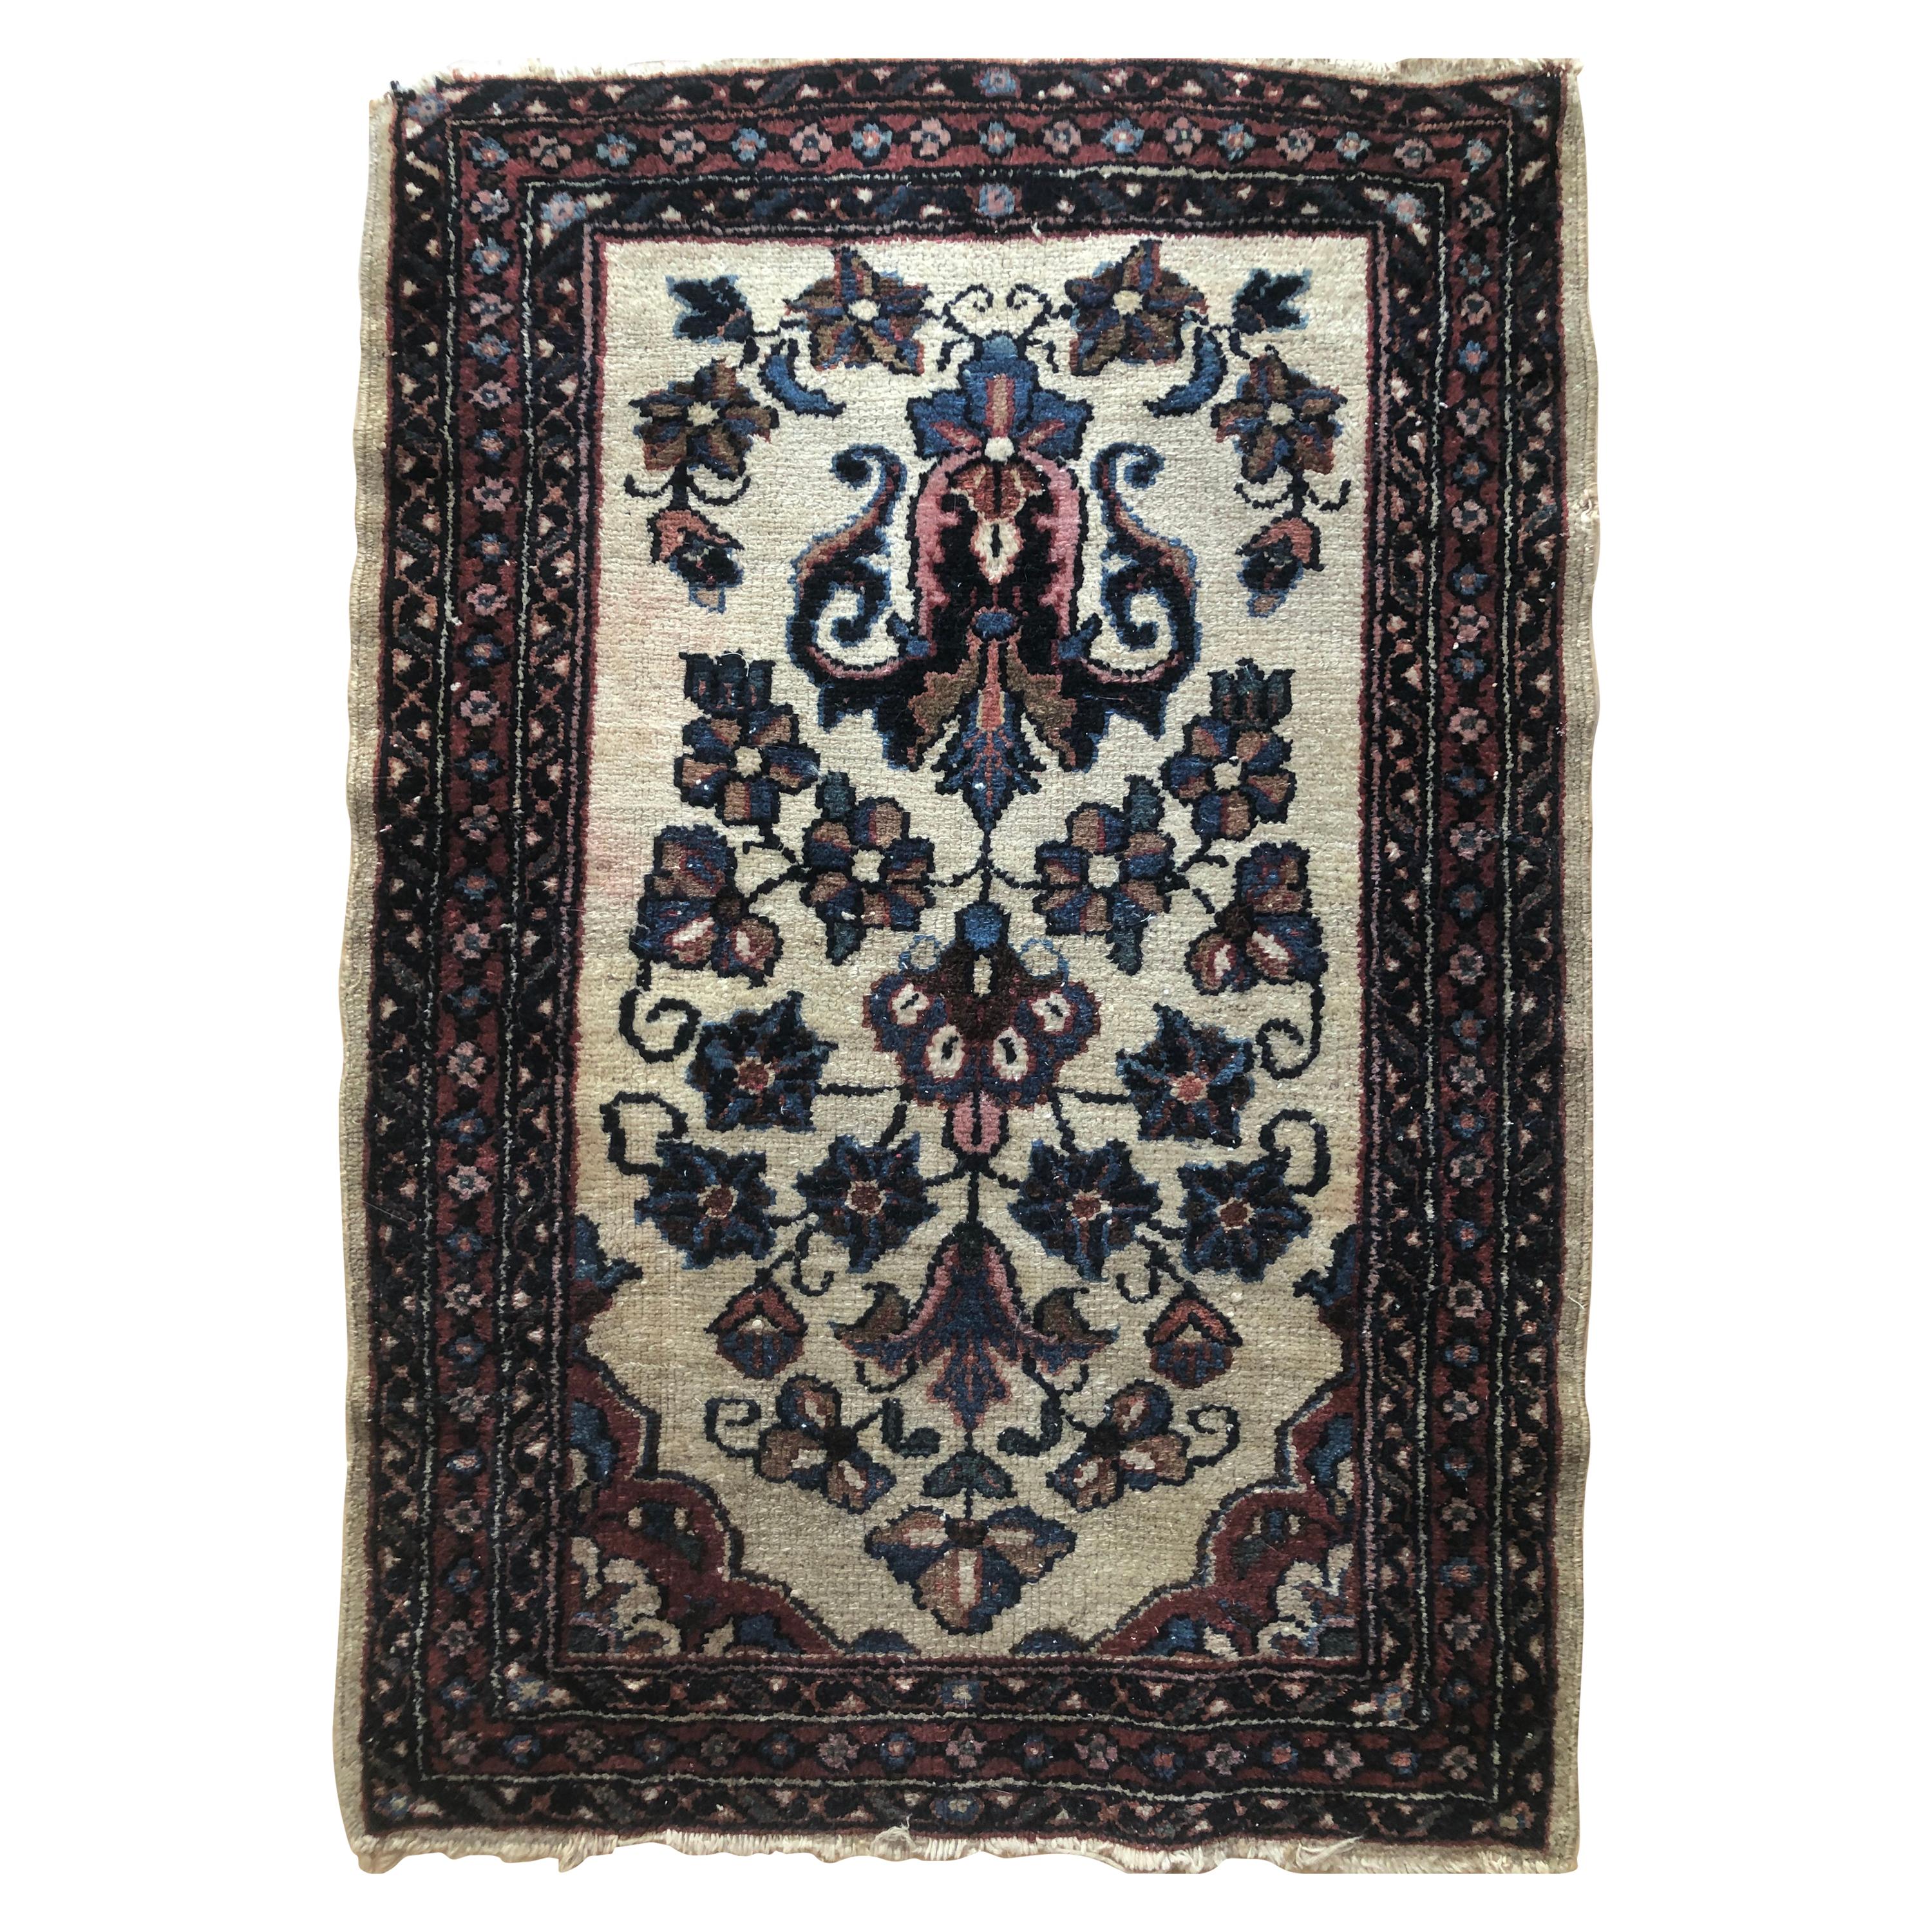 Small Floral Persian Rug Fine Wool